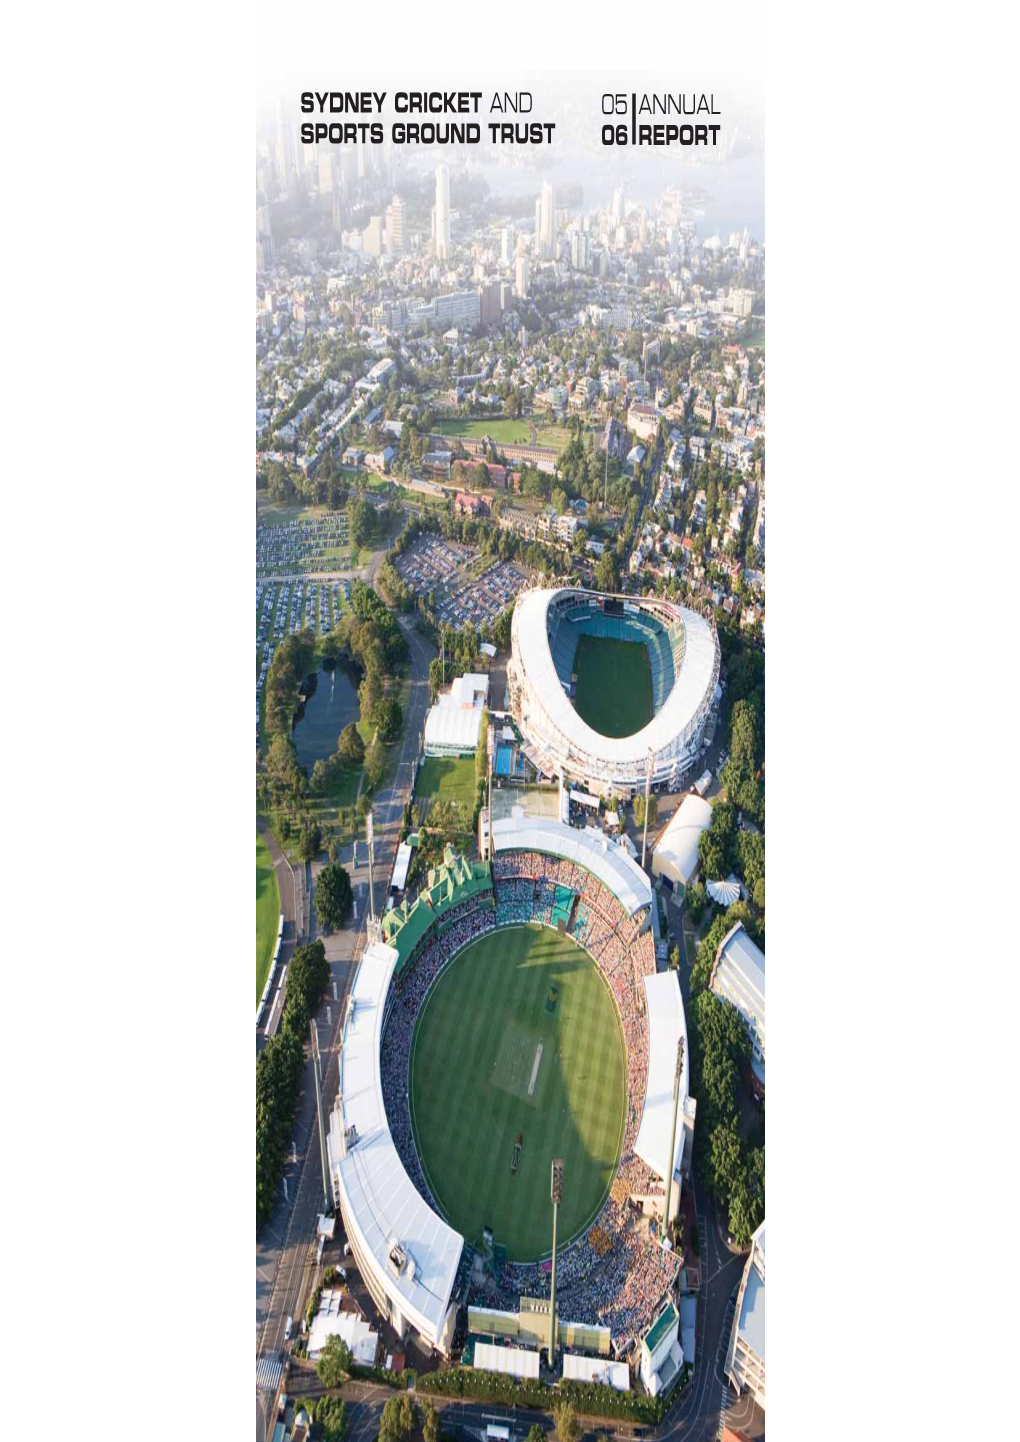 Sydney Cricket and Sports Ground Trust 05 Annual 06